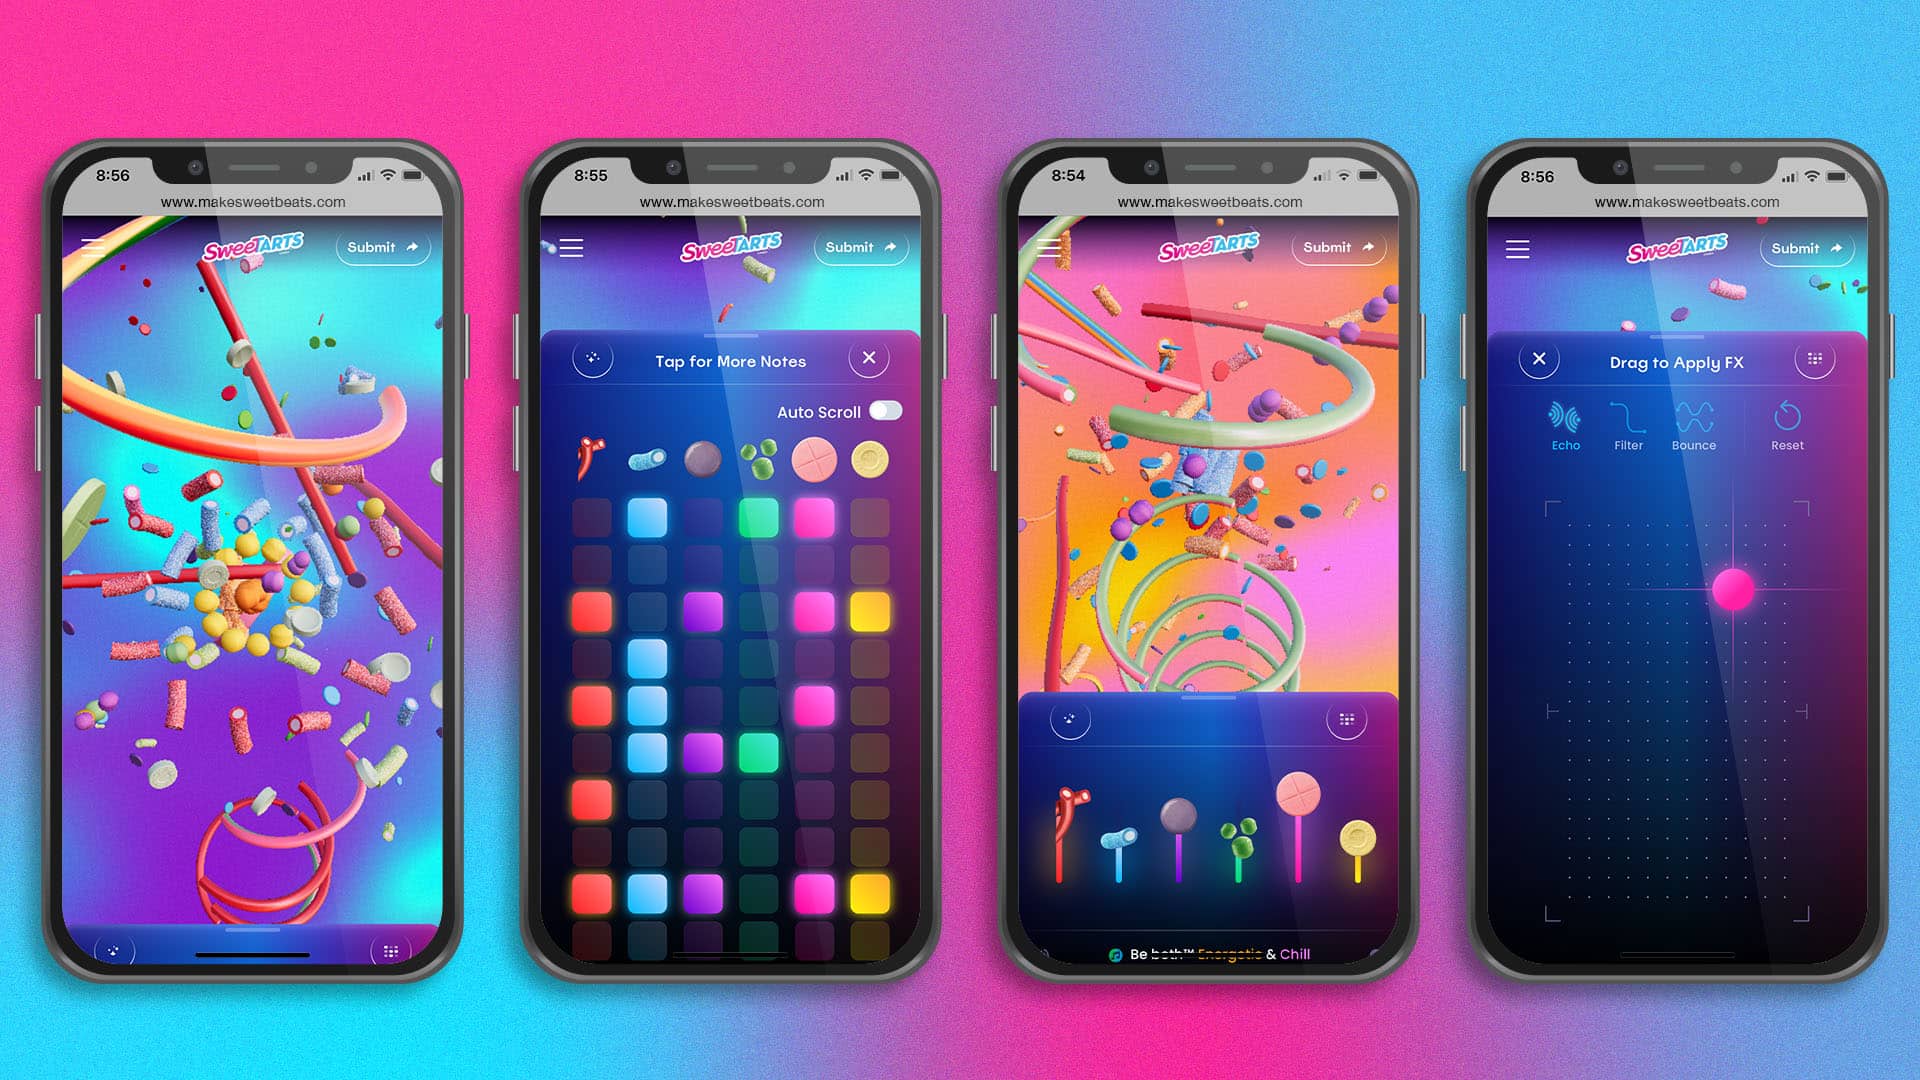 Four mobile phone screens each showing the bright and colorful interface of the Sweet Beats website experience. They look like video games.